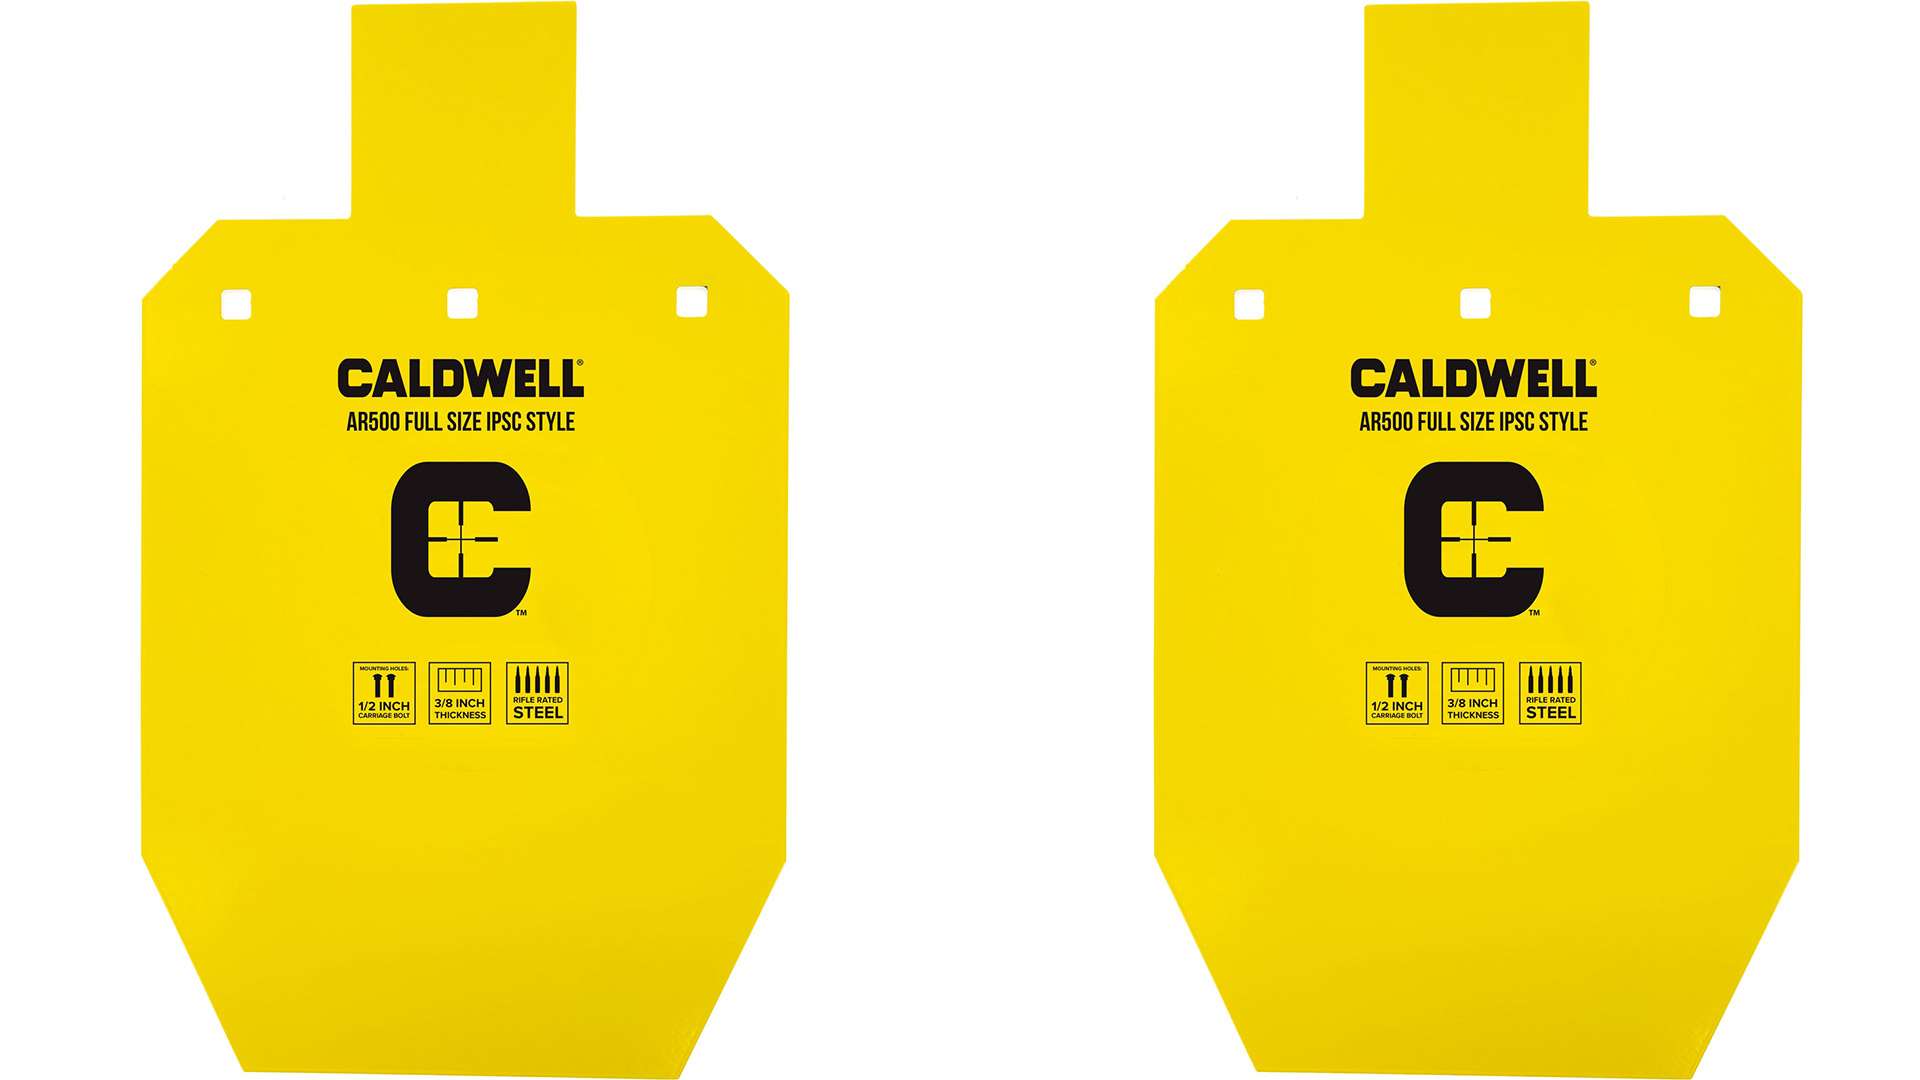 Caldwell IPSC Steel Target | Full Size